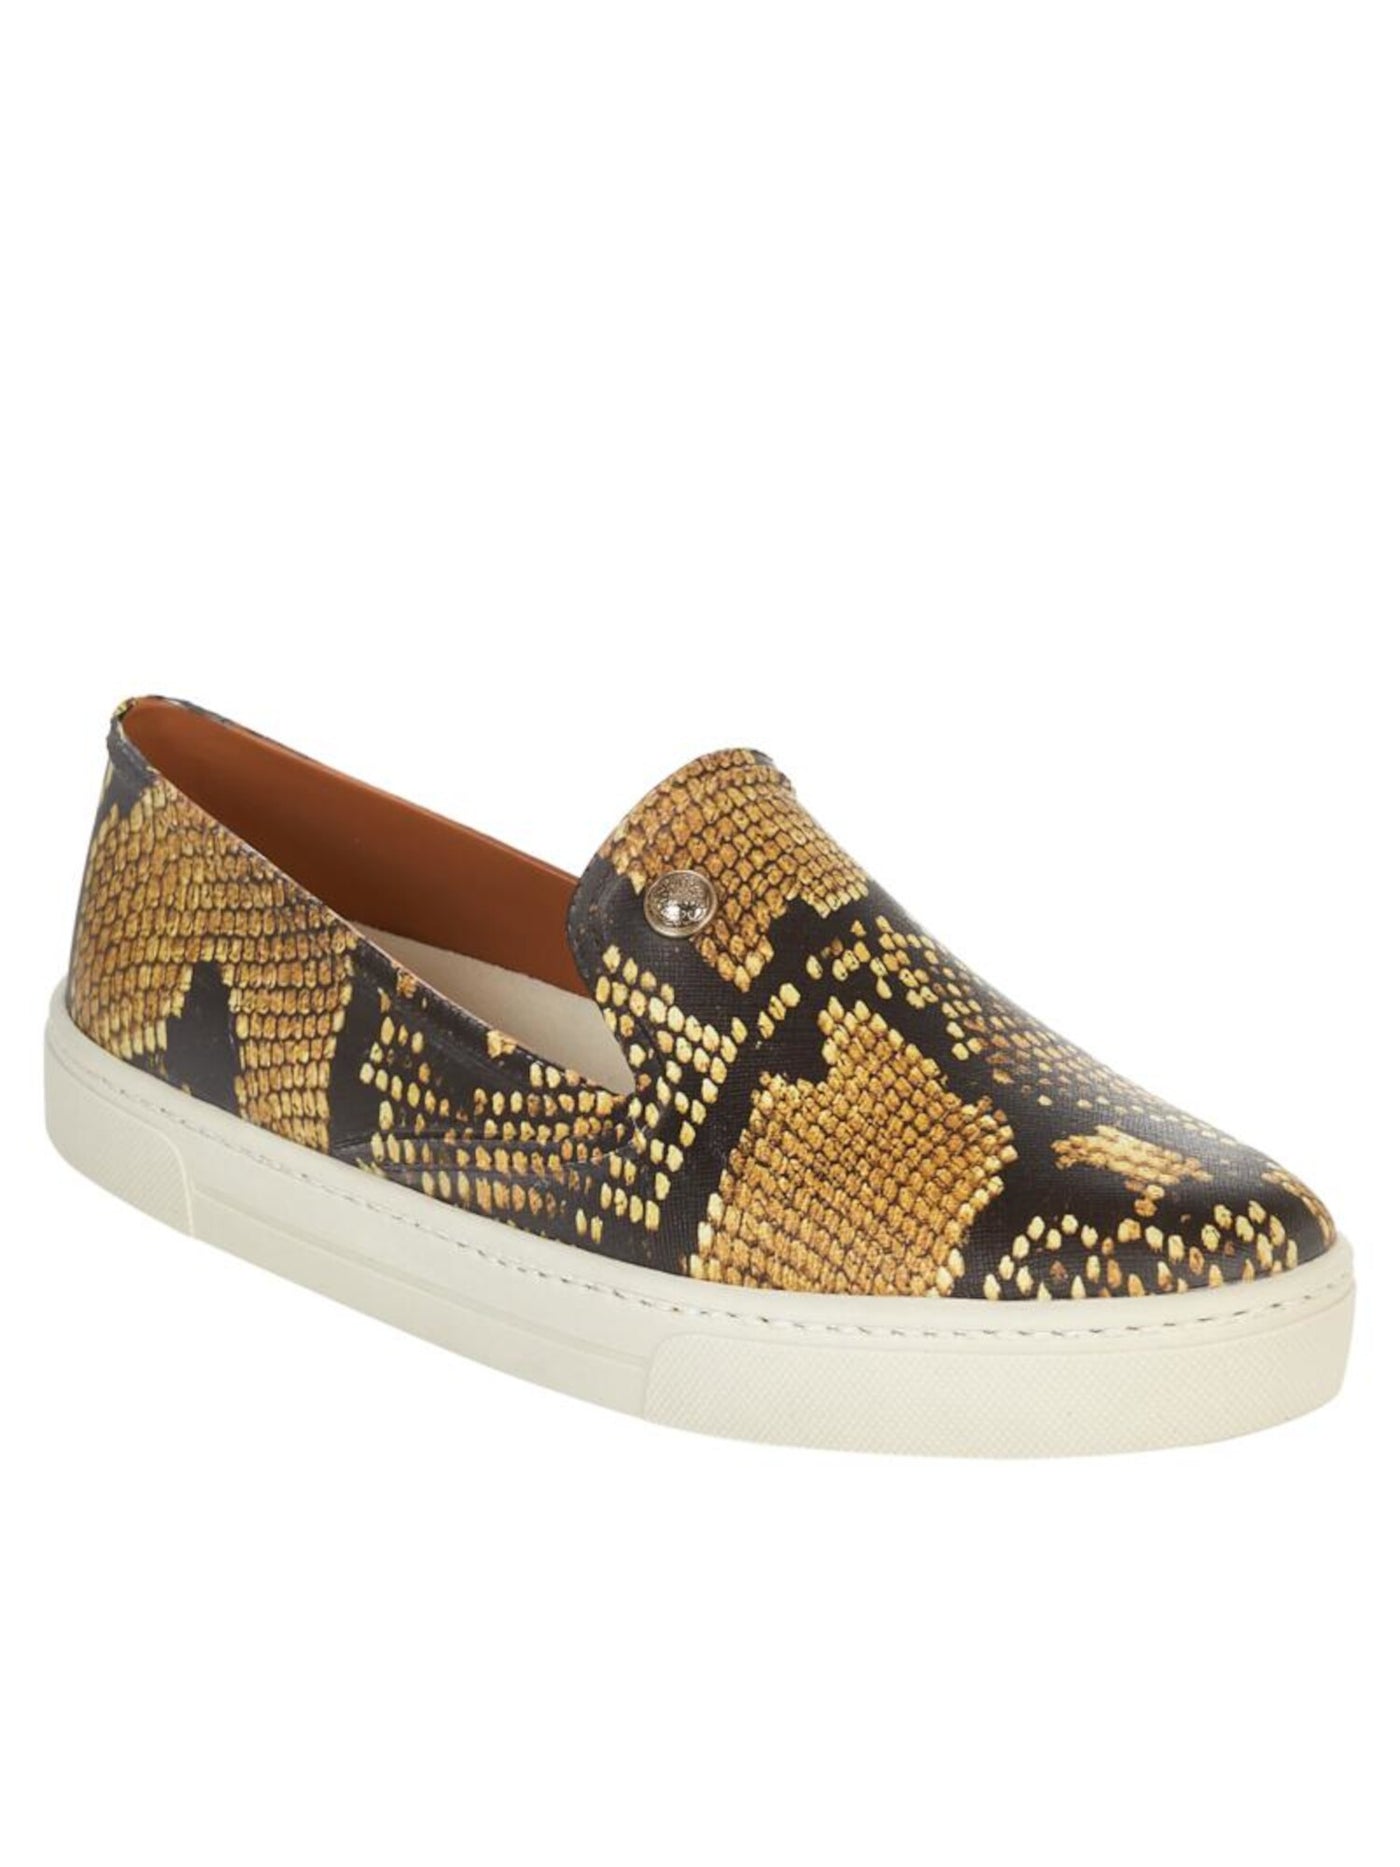 VINCE CAMUTO Womens Leopard Beige Animal Print Padded Marjetta Round Toe Slip On Athletic Sneakers Shoes 7.5